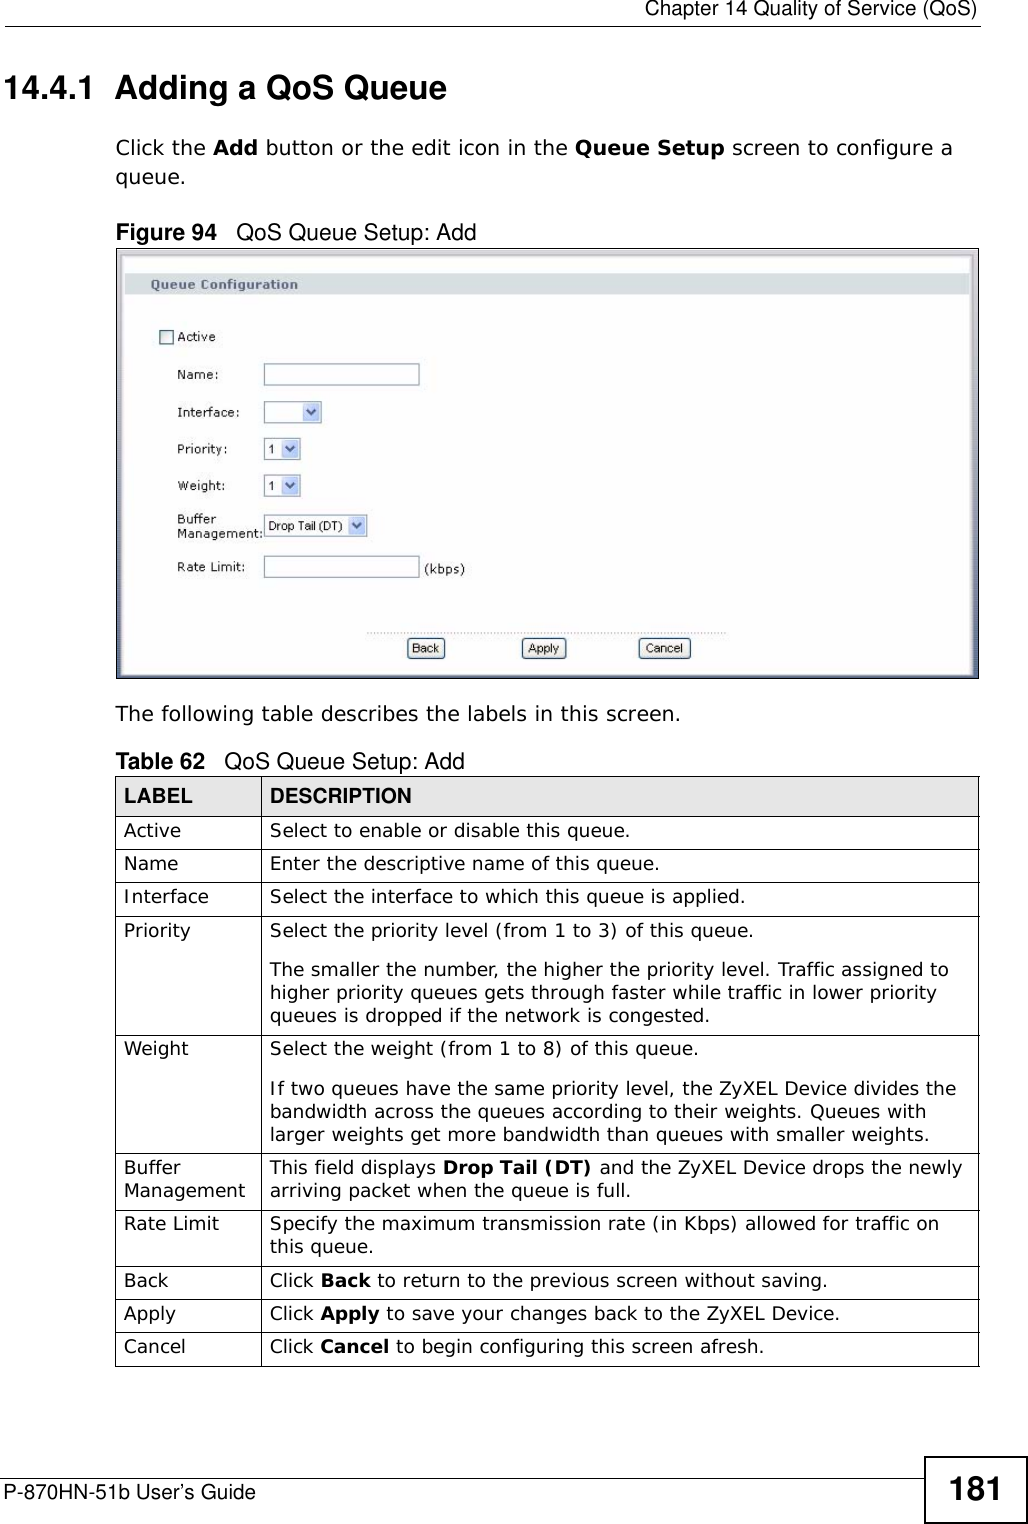  Chapter 14 Quality of Service (QoS)P-870HN-51b User’s Guide 18114.4.1  Adding a QoS Queue Click the Add button or the edit icon in the Queue Setup screen to configure a queue. Figure 94   QoS Queue Setup: Add The following table describes the labels in this screen.  Table 62   QoS Queue Setup: AddLABEL DESCRIPTIONActive Select to enable or disable this queue.Name Enter the descriptive name of this queue.Interface Select the interface to which this queue is applied.Priority Select the priority level (from 1 to 3) of this queue.The smaller the number, the higher the priority level. Traffic assigned to higher priority queues gets through faster while traffic in lower priority queues is dropped if the network is congested.Weight Select the weight (from 1 to 8) of this queue. If two queues have the same priority level, the ZyXEL Device divides the bandwidth across the queues according to their weights. Queues with larger weights get more bandwidth than queues with smaller weights.Buffer Management This field displays Drop Tail (DT) and the ZyXEL Device drops the newly arriving packet when the queue is full.Rate Limit Specify the maximum transmission rate (in Kbps) allowed for traffic on this queue.Back Click Back to return to the previous screen without saving.Apply Click Apply to save your changes back to the ZyXEL Device.Cancel Click Cancel to begin configuring this screen afresh.